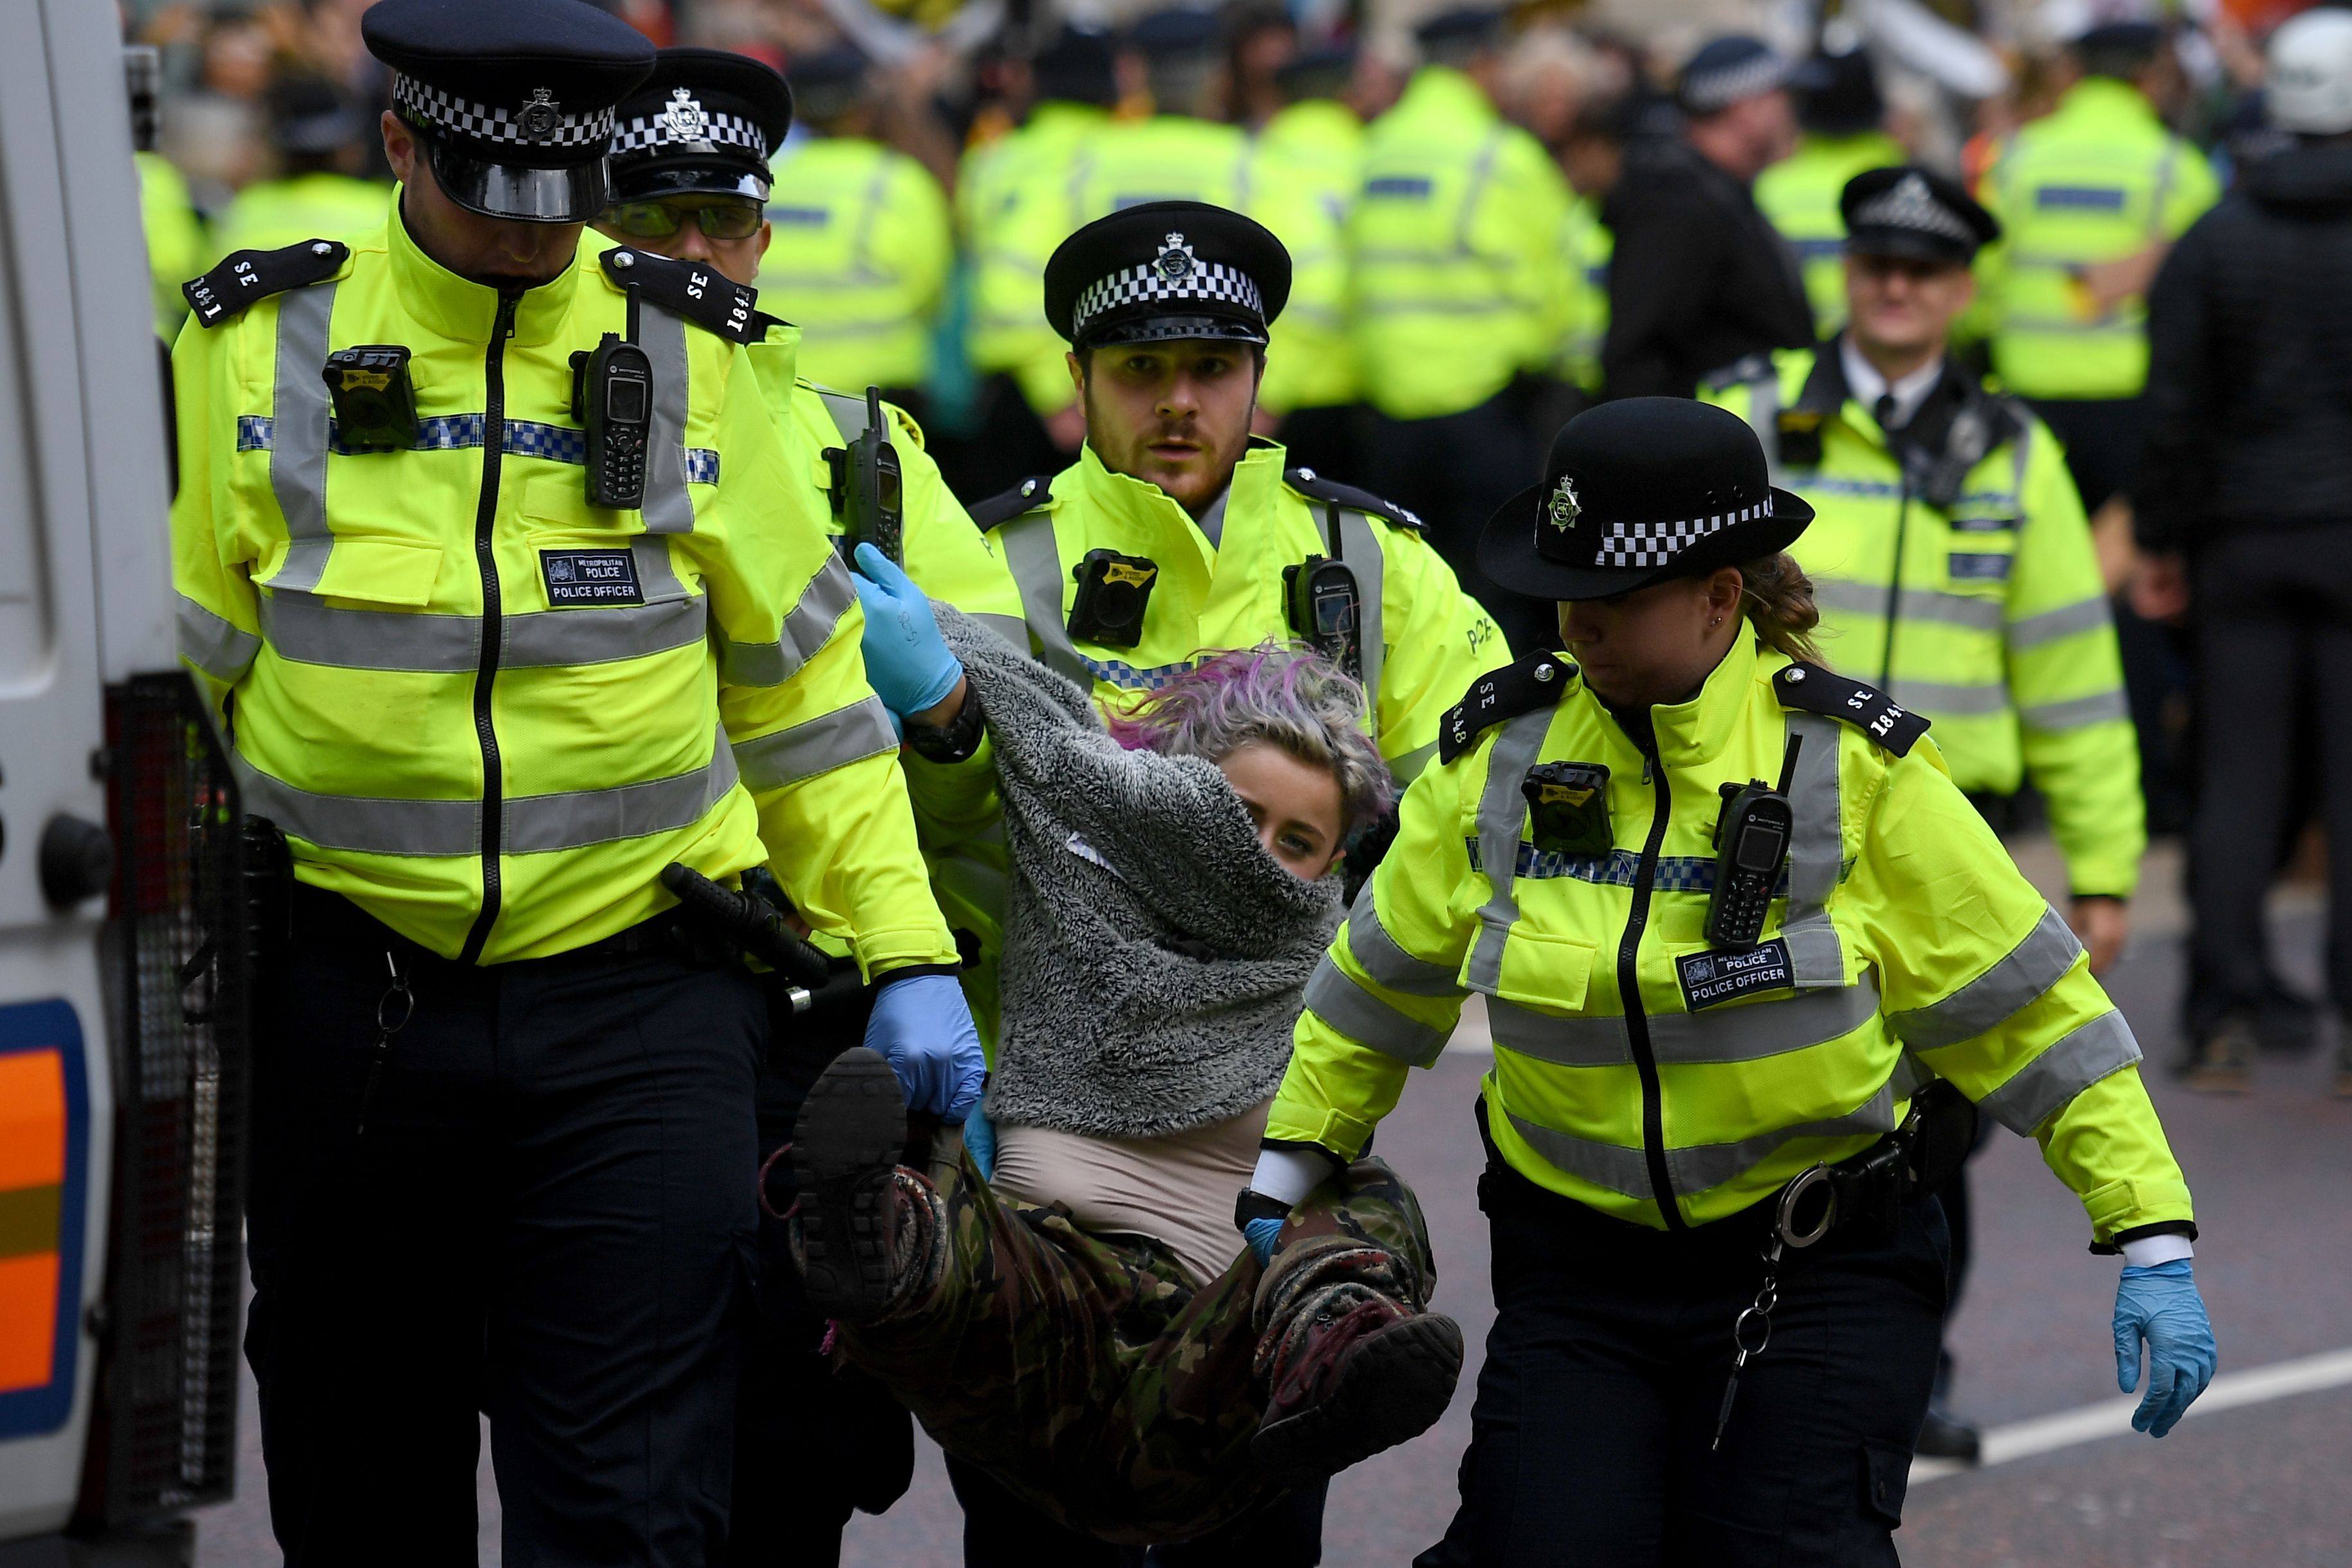 Police arrest a climate activist during the third day of climate change demonstrations by the Extinction Rebellion group, in Westminster, central London, on October 9, 2019. Photo: AFP